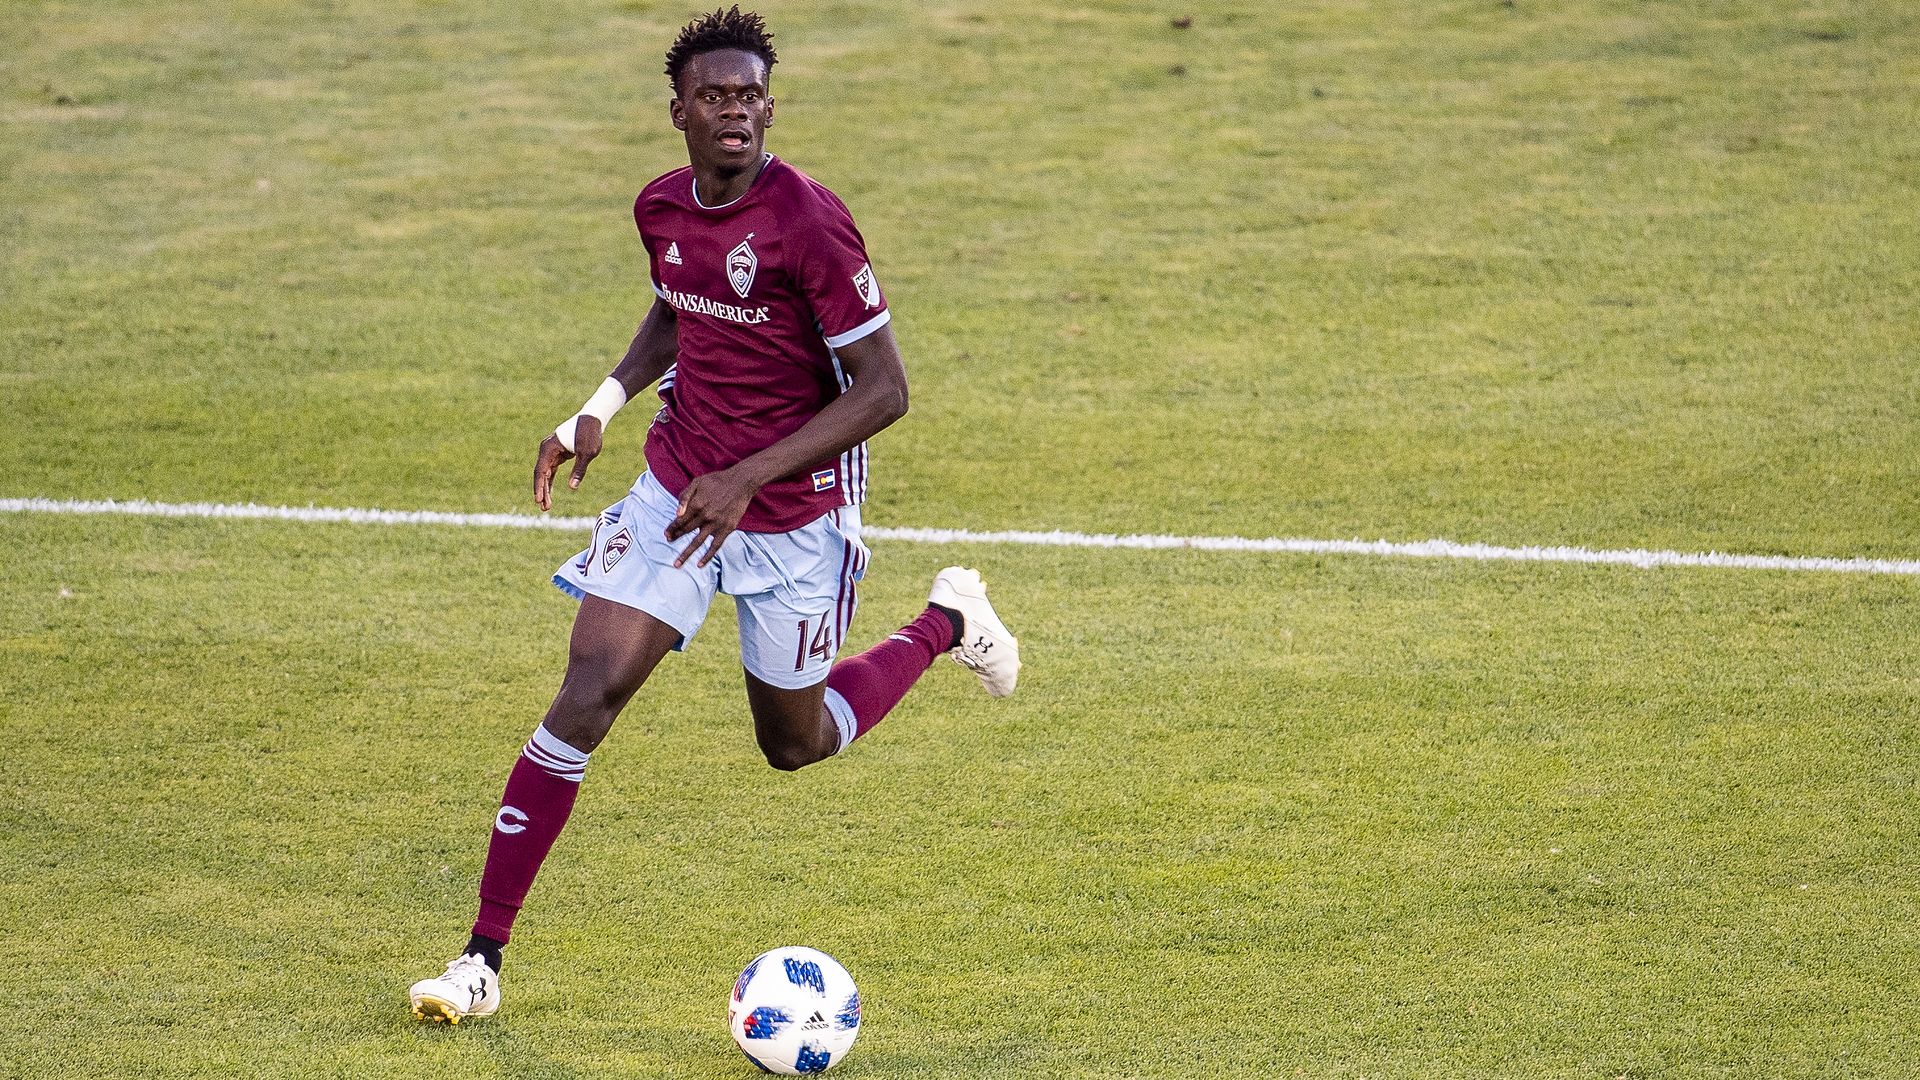 Dominique Badji of the Colorado Rapids scored a goal Sunday. Photo: Timothy Nwachukwu/Getty Images